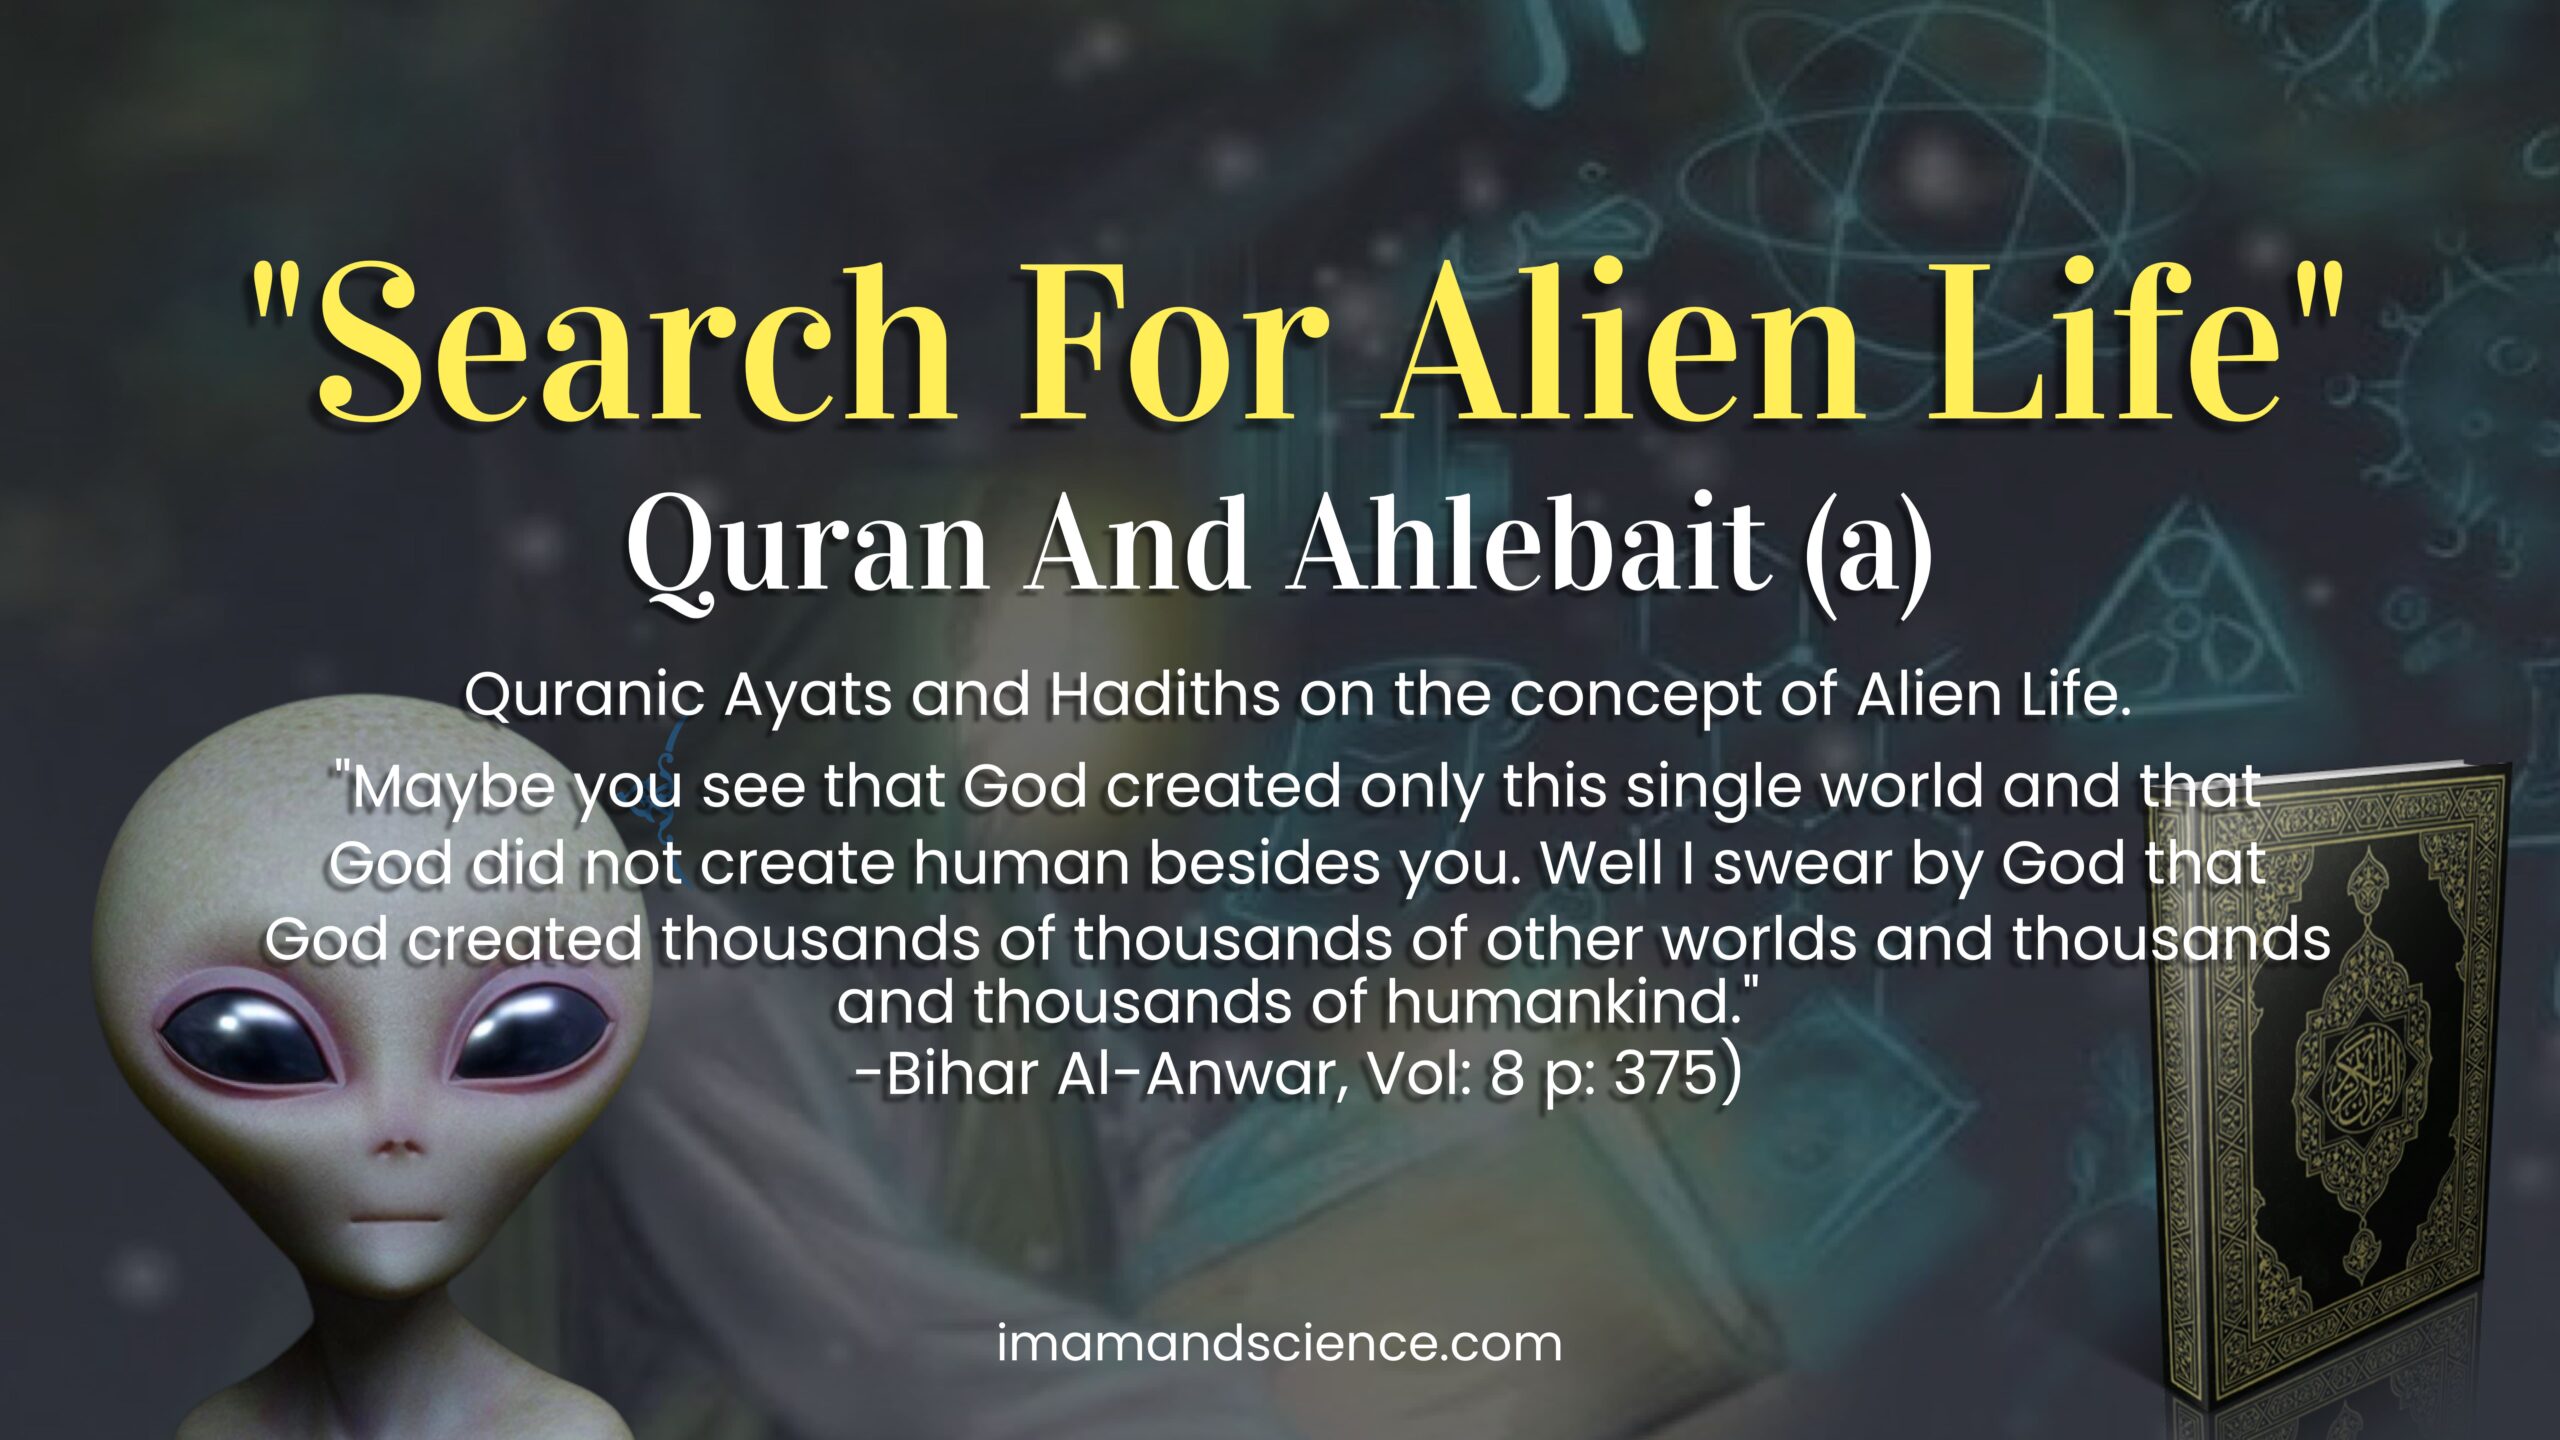 The Search for Alien Life: “Quran and Ahlebait (a)”